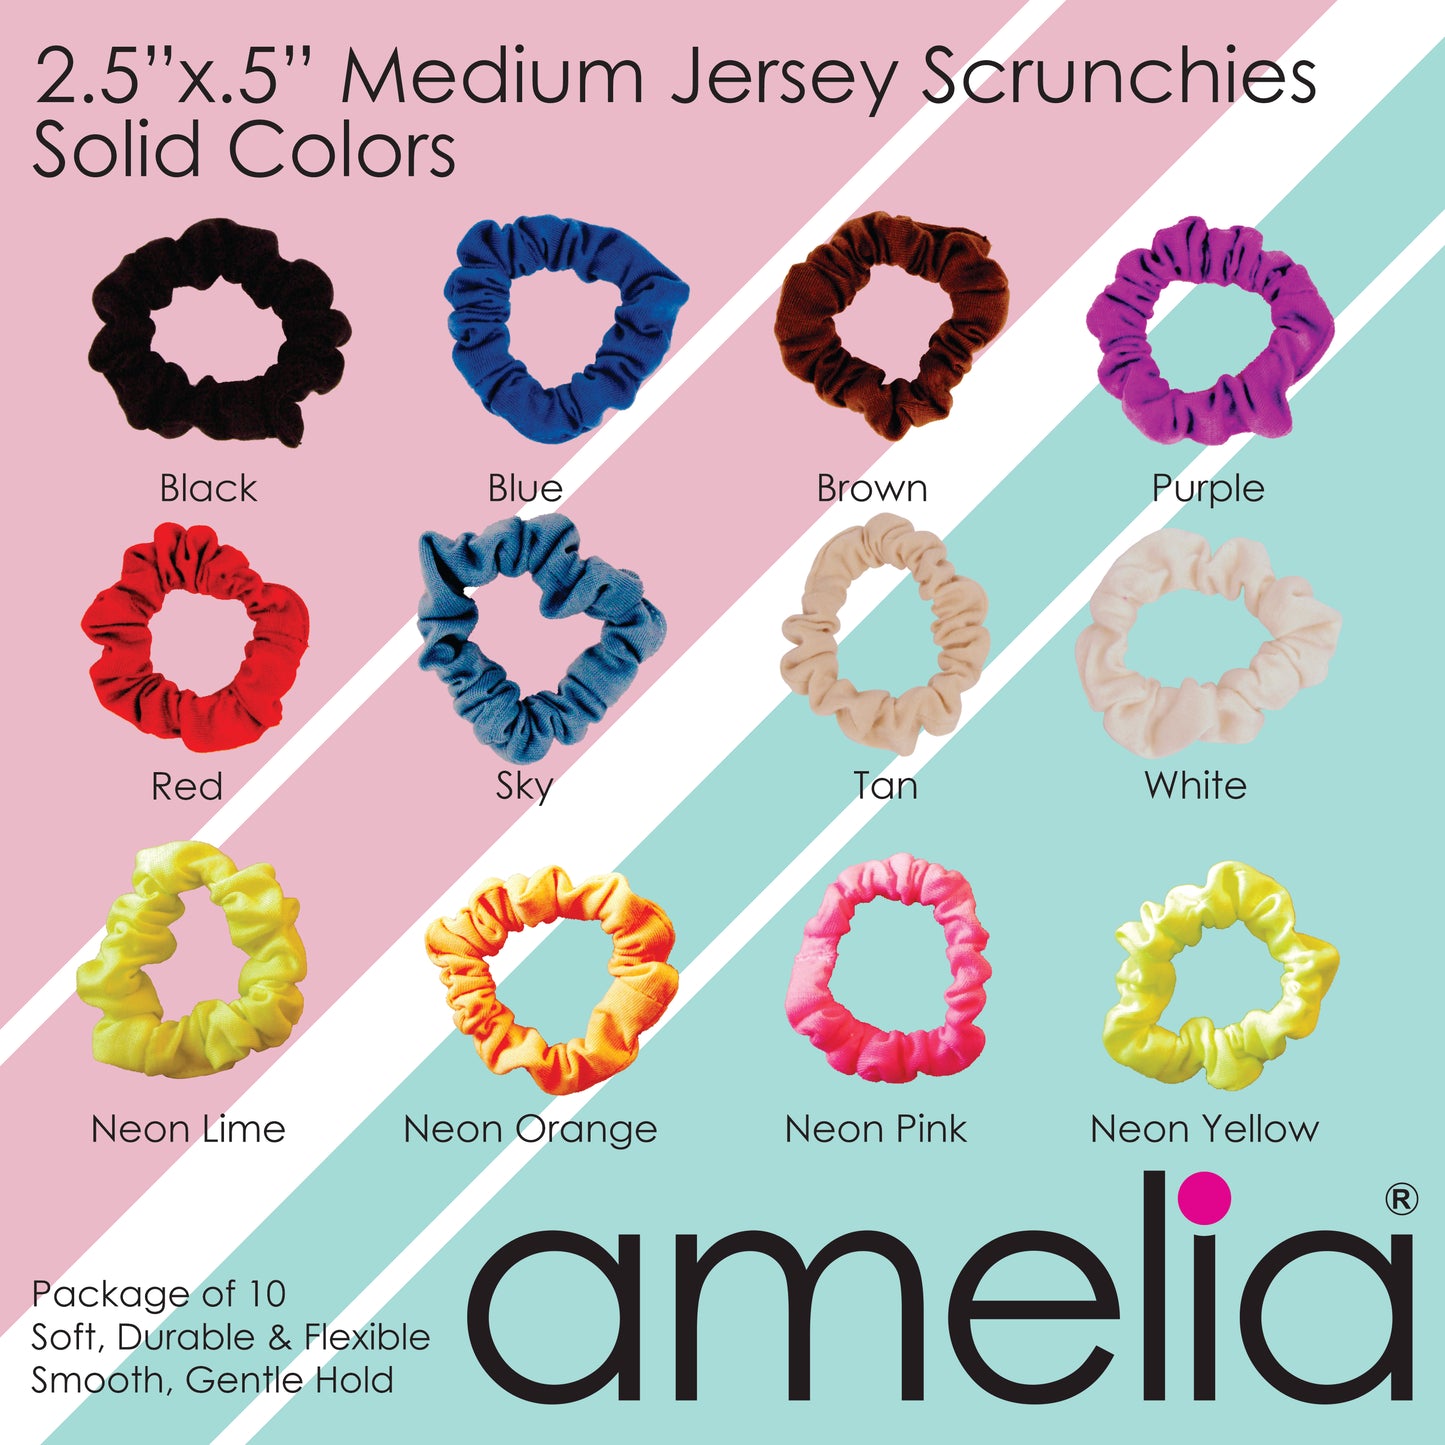 Amelia Beauty, Medium White Jersey Scrunchies, 2.5in Diameter, Gentle on Hair, Strong Hold, No Snag, No Dents or Creases. 10 Pack